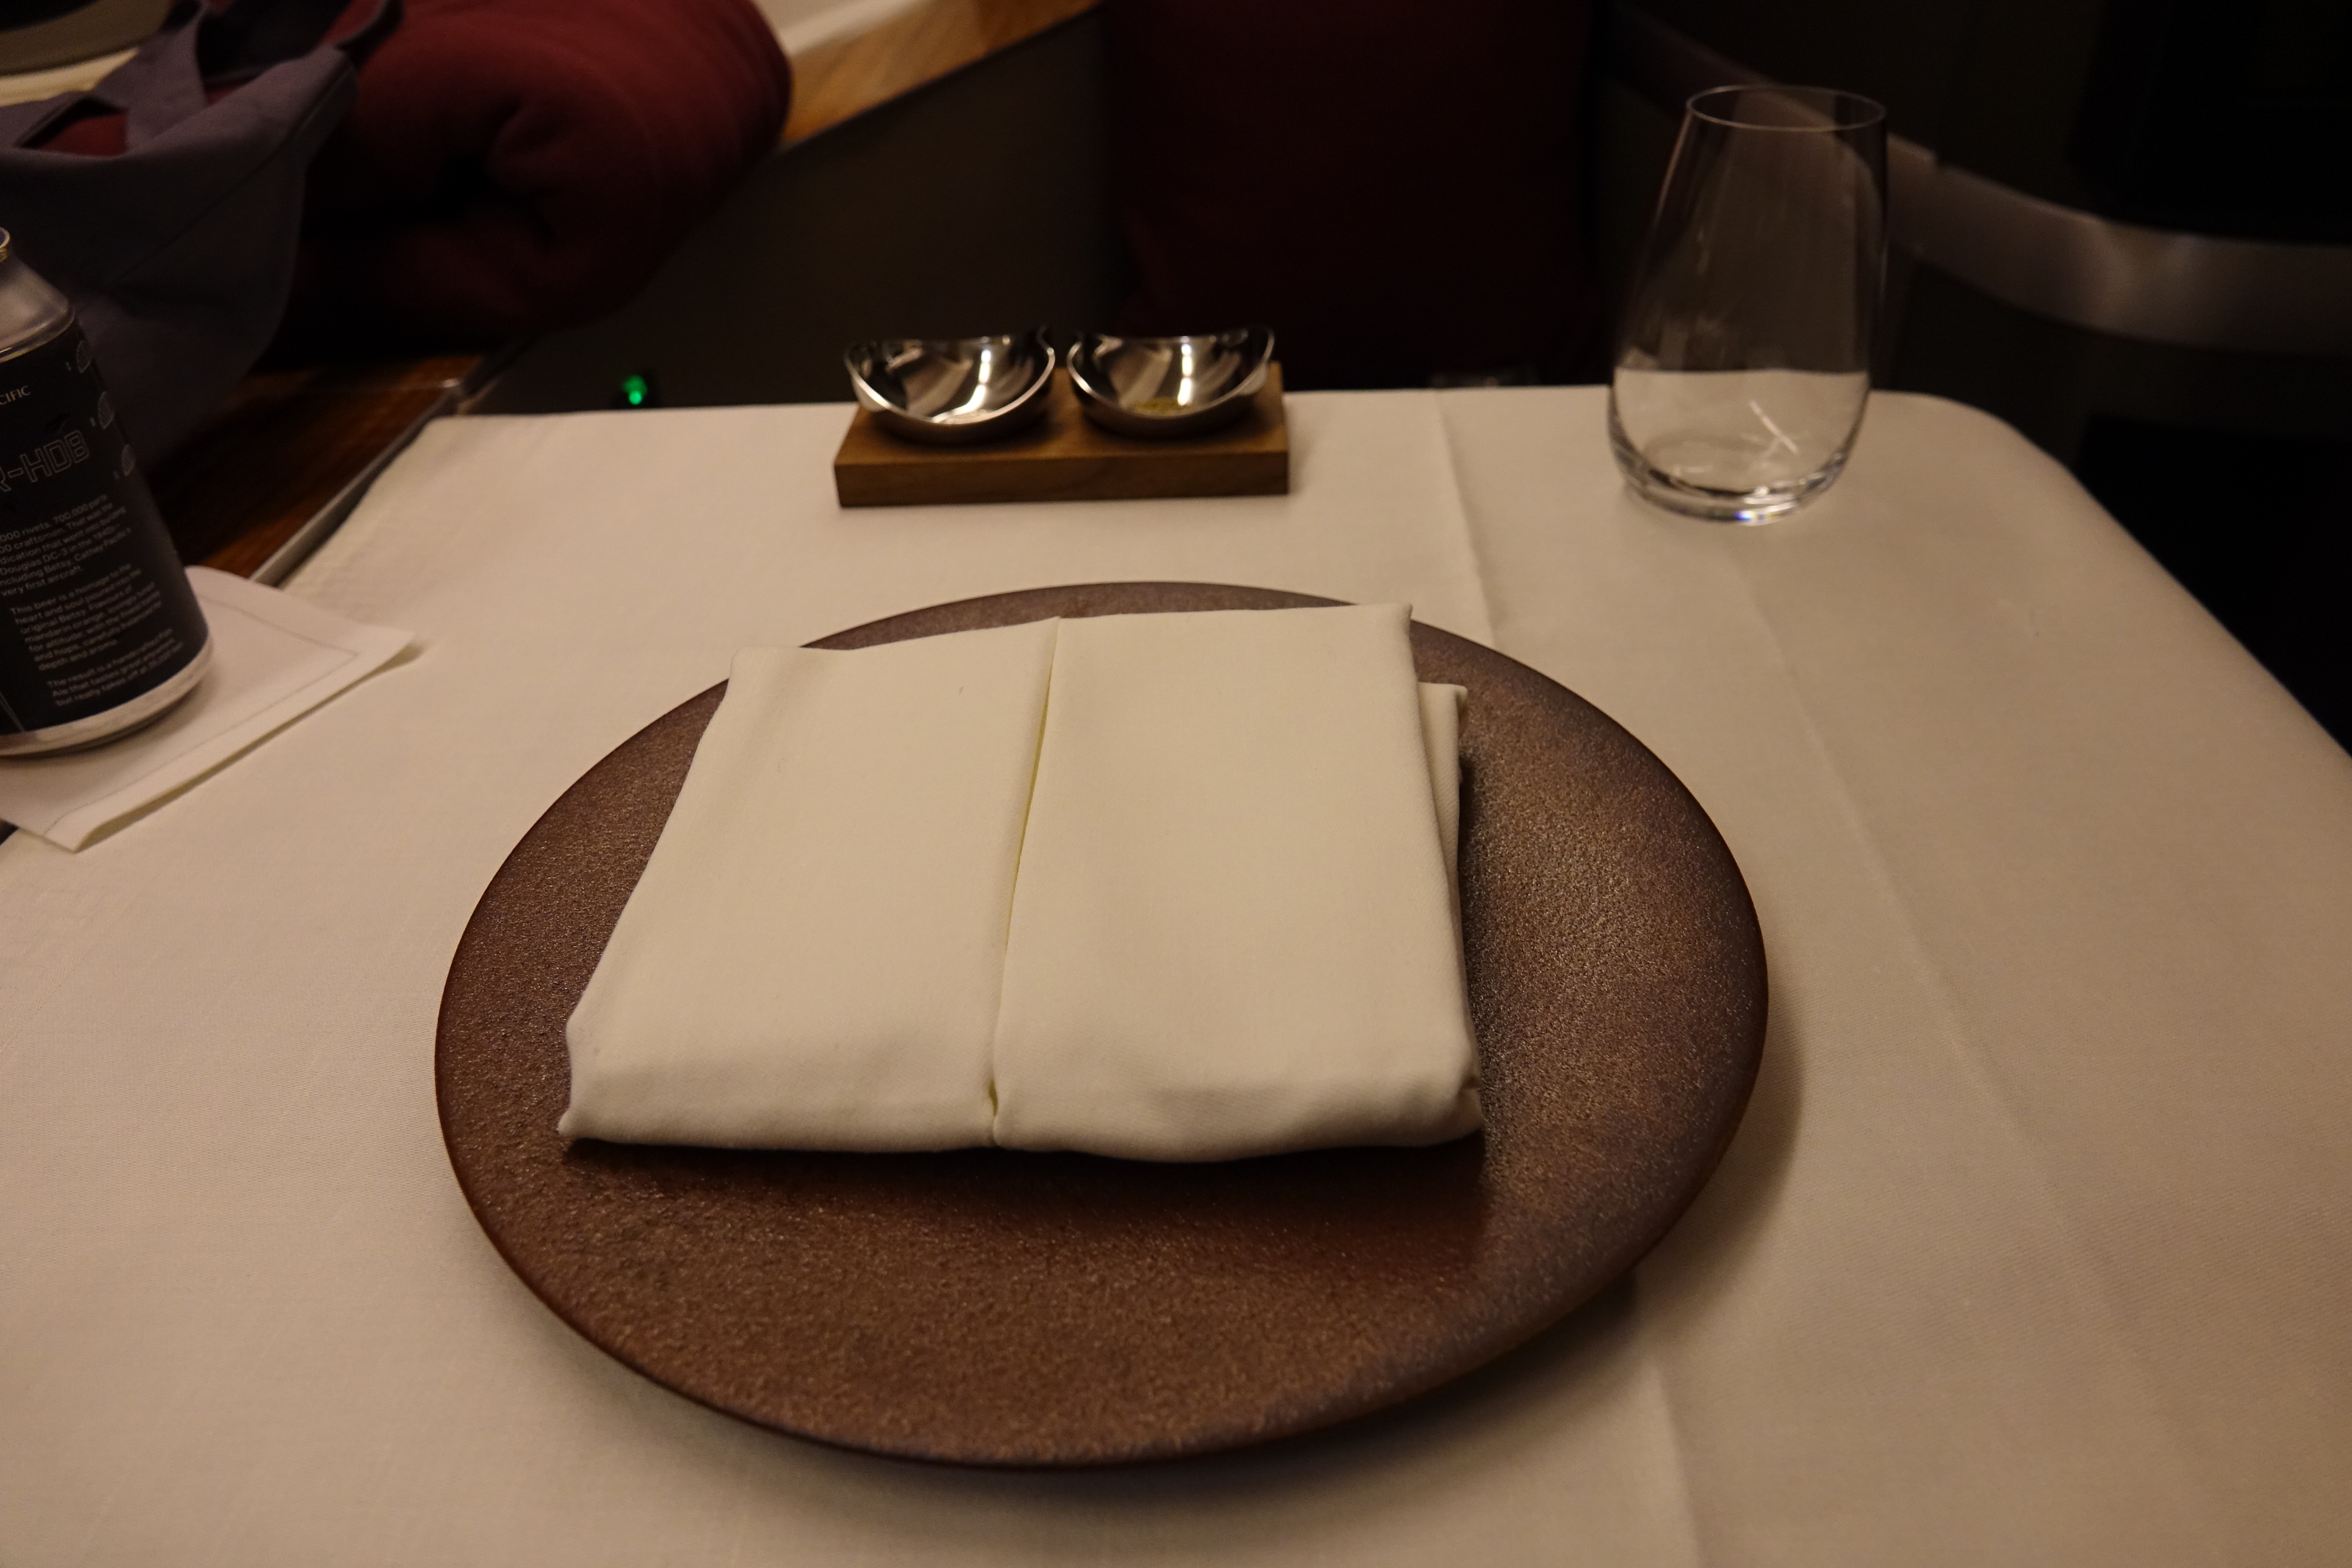 a plate with napkins on it